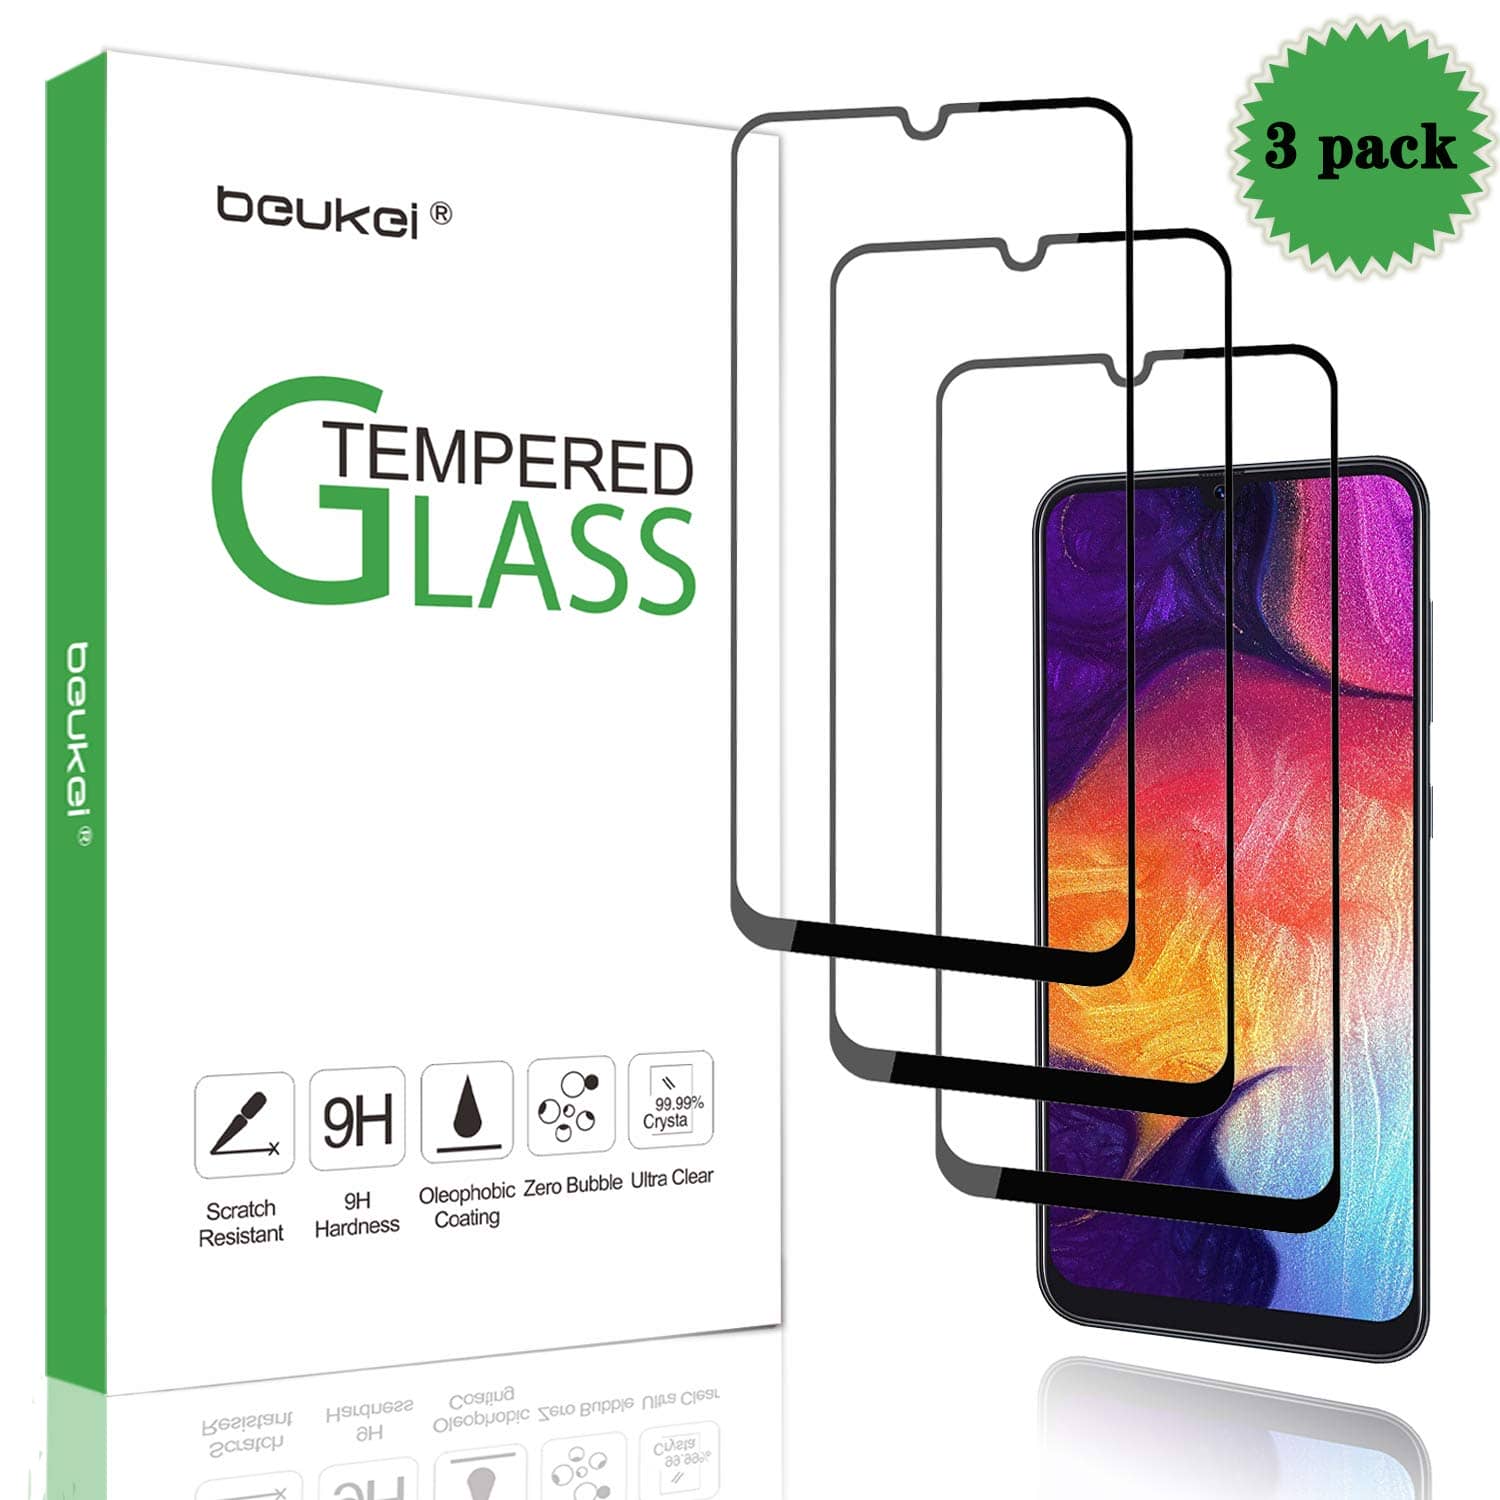 10 Best Screen Protectors For Samsung Galaxy A50